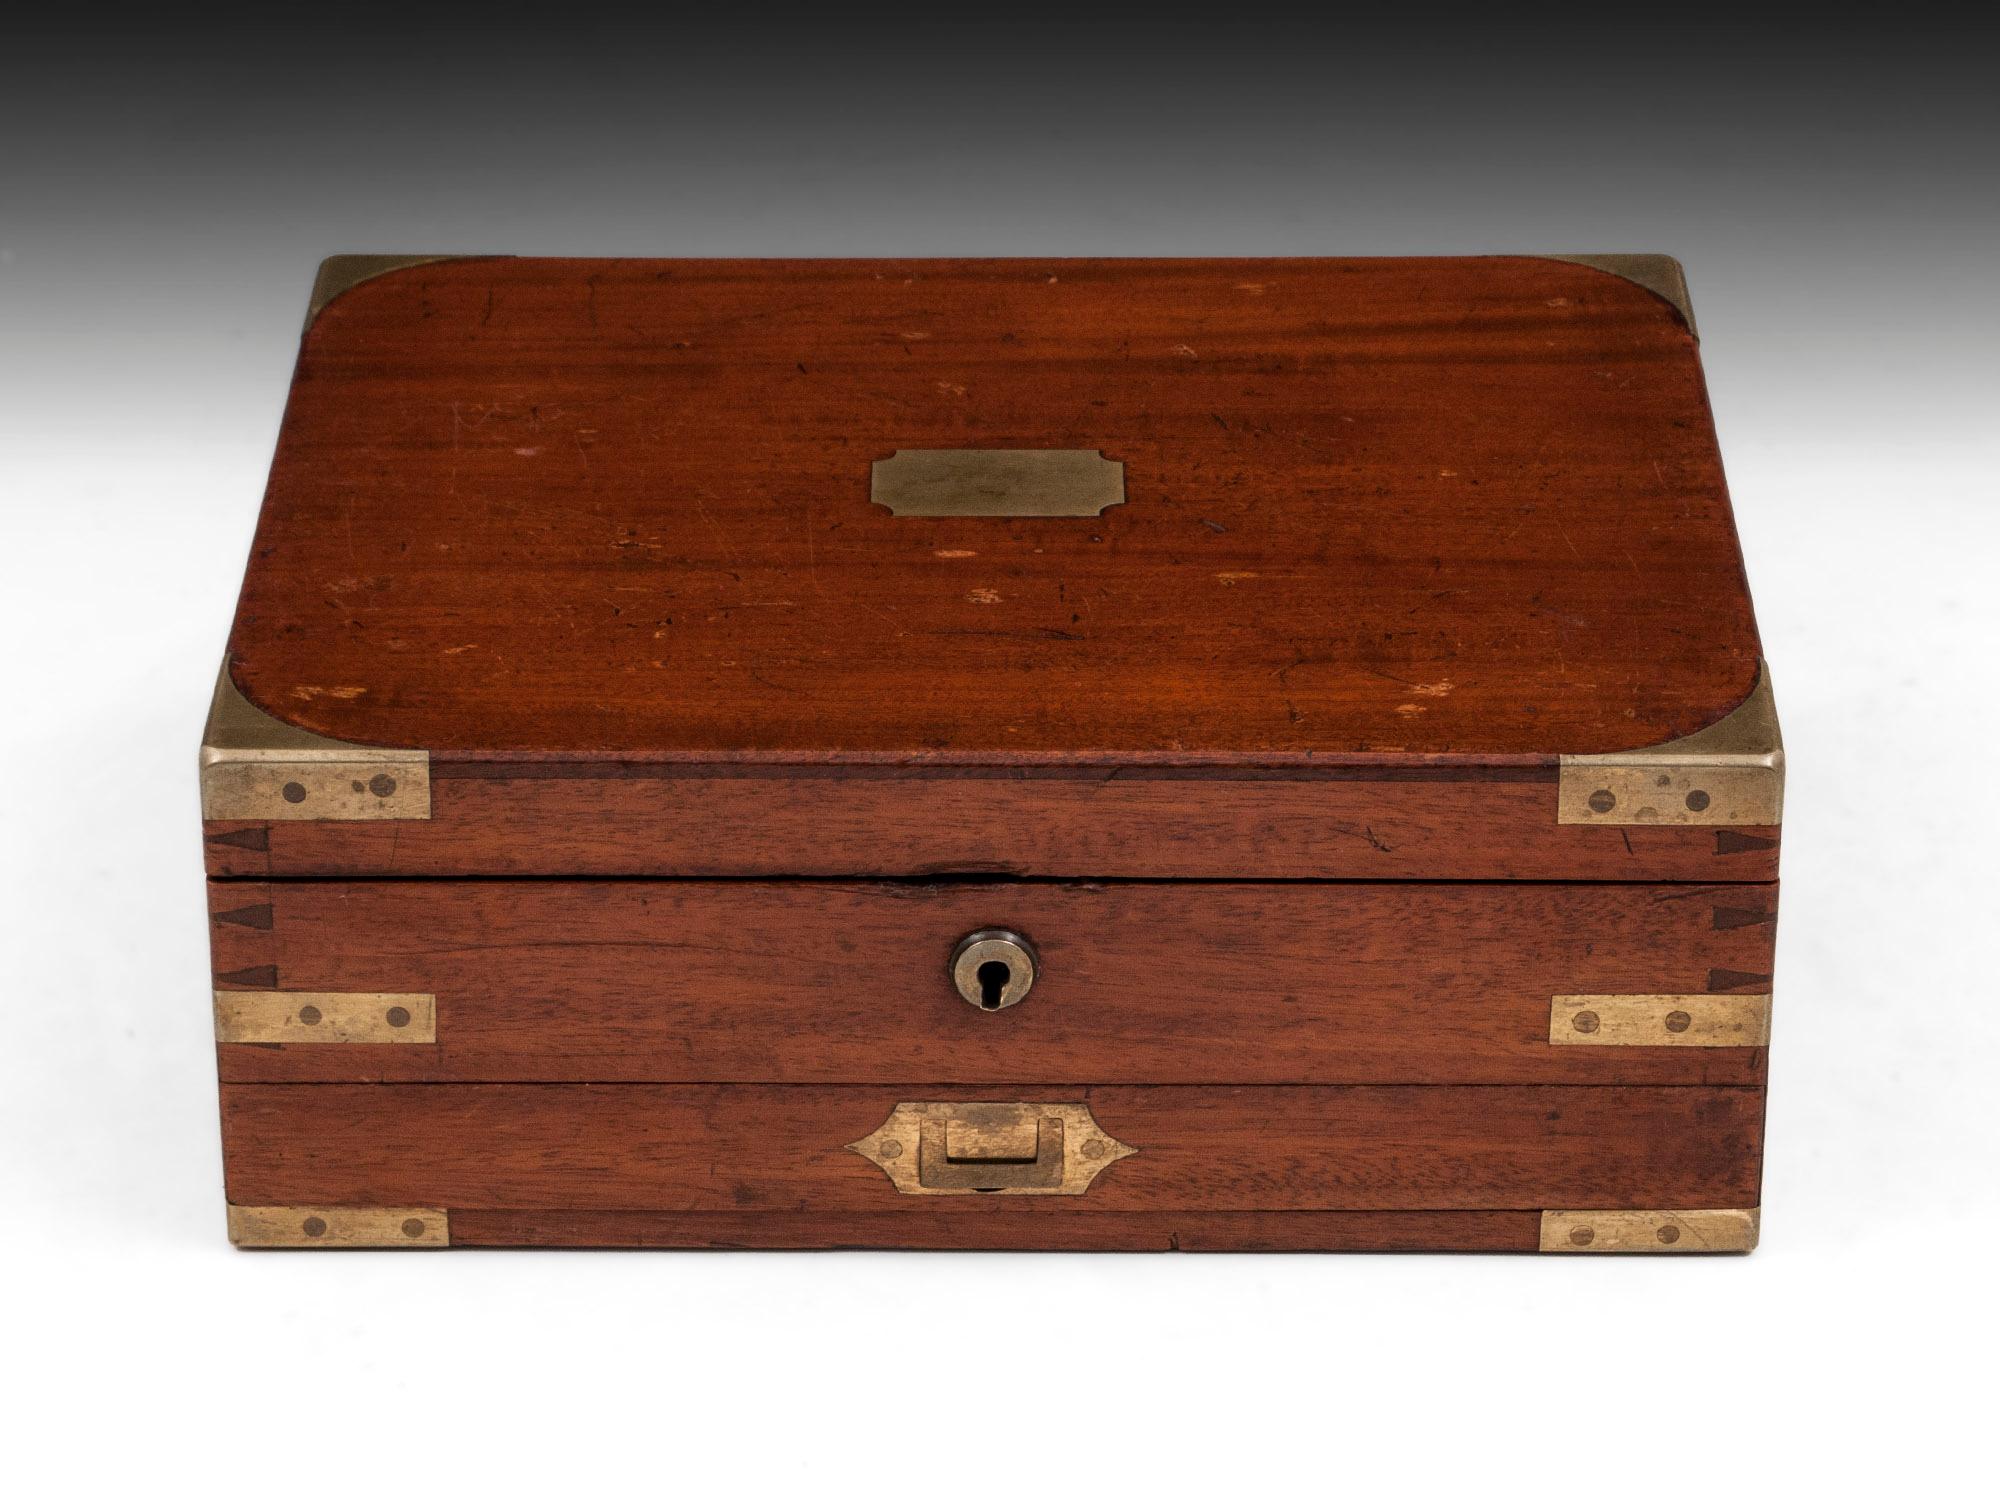 Mahogany brass-cornered dovetailed Artist's box with flush Campaign handle to the front drawer. The underside of the lid has an embossed burgundy leather insert to the interior of the lid, stamped “James Newman, 24 Soho Square, London”. Fitted tray